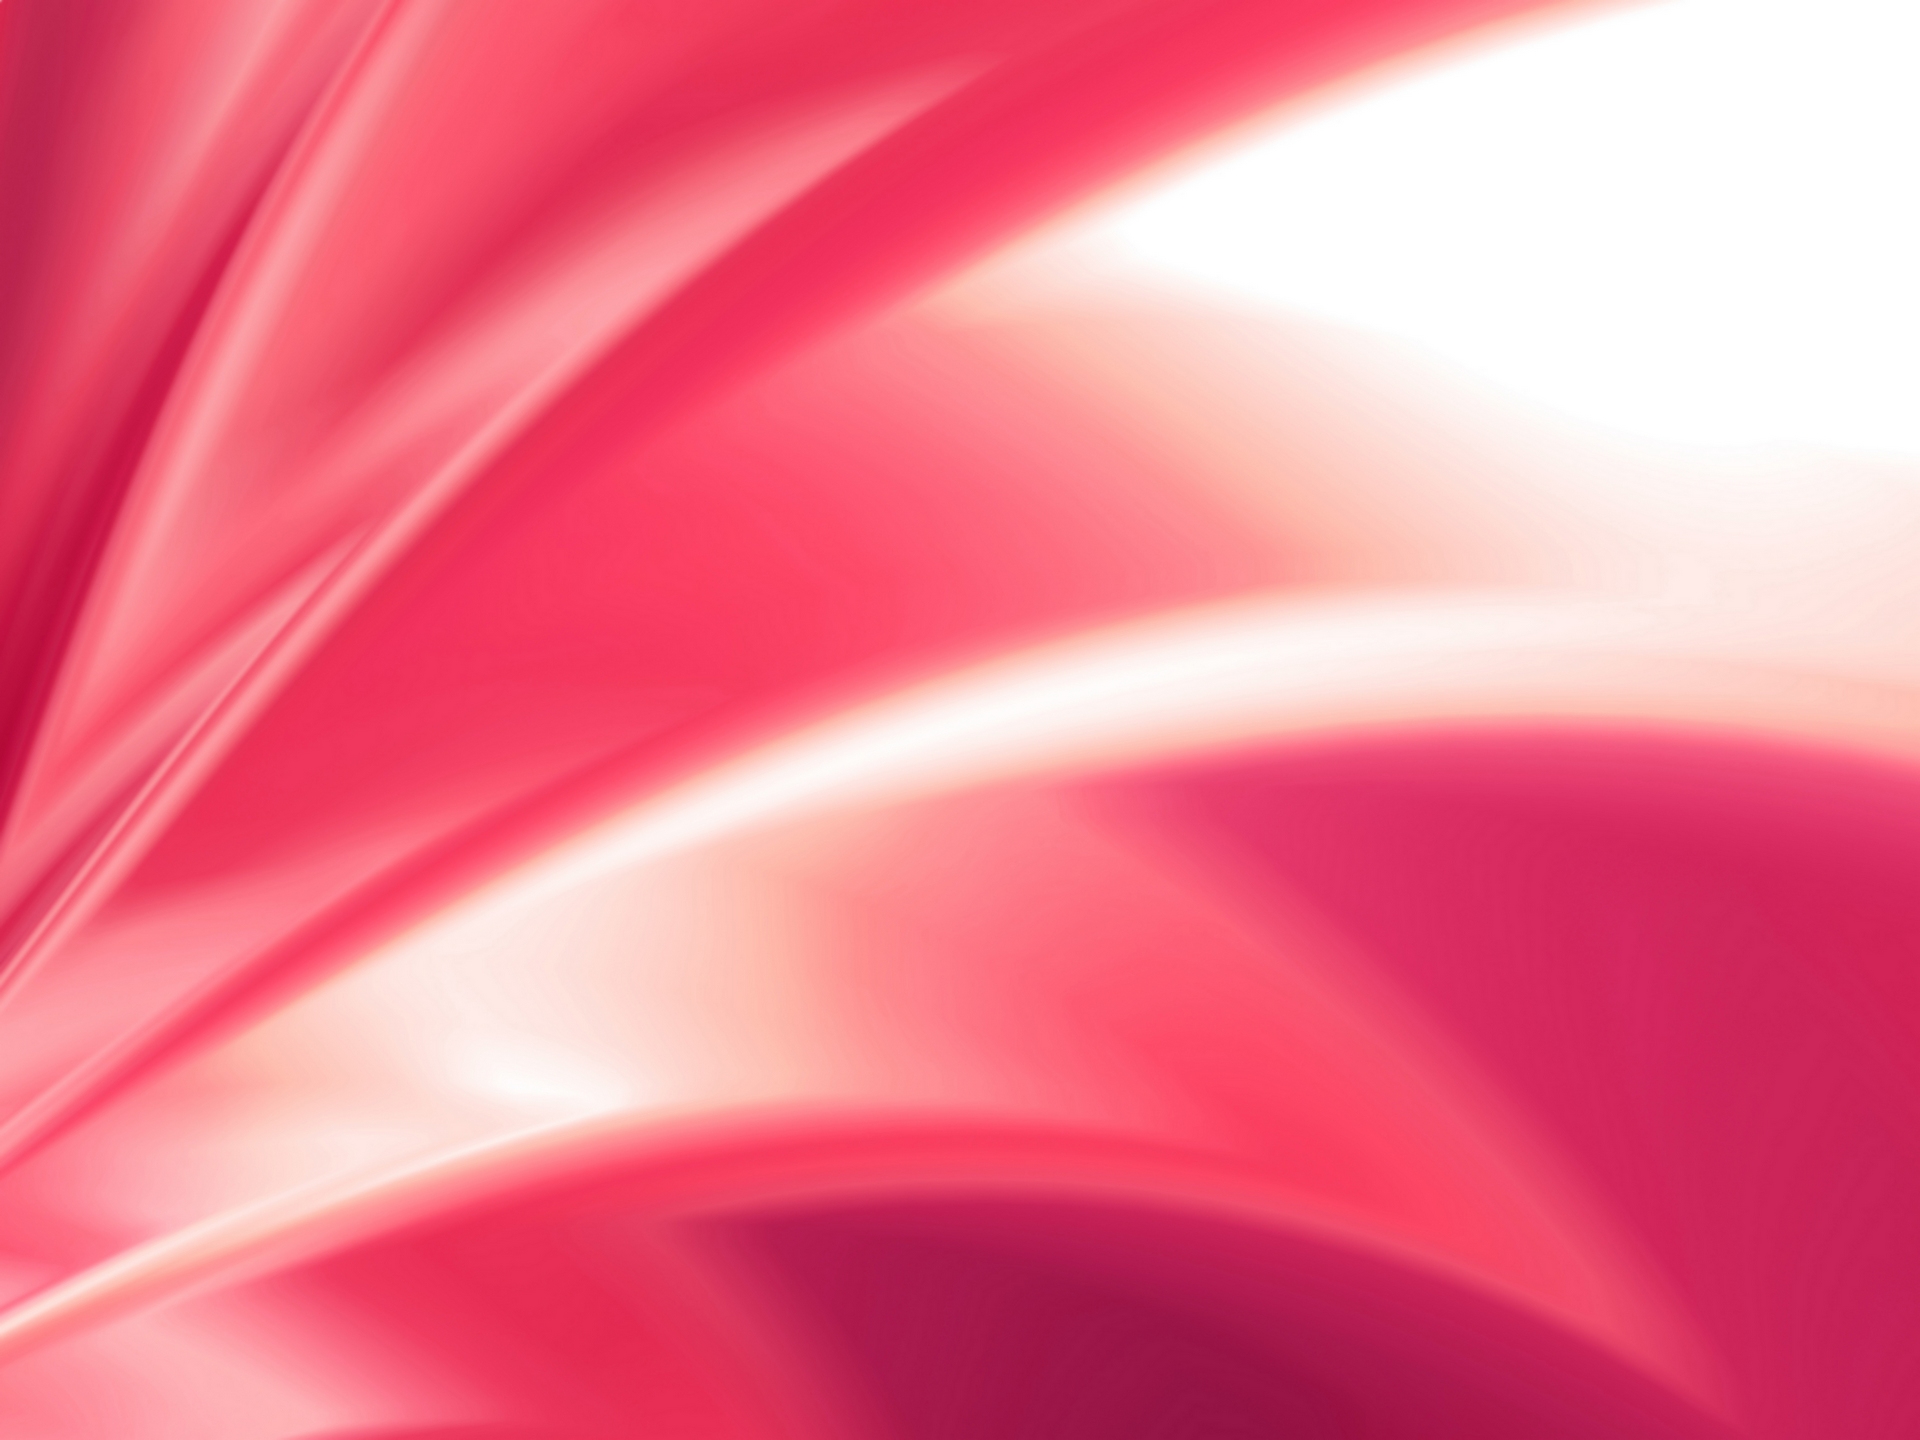 Pink abstraction   Pink Color Wallpaper 23830290 1920x1440